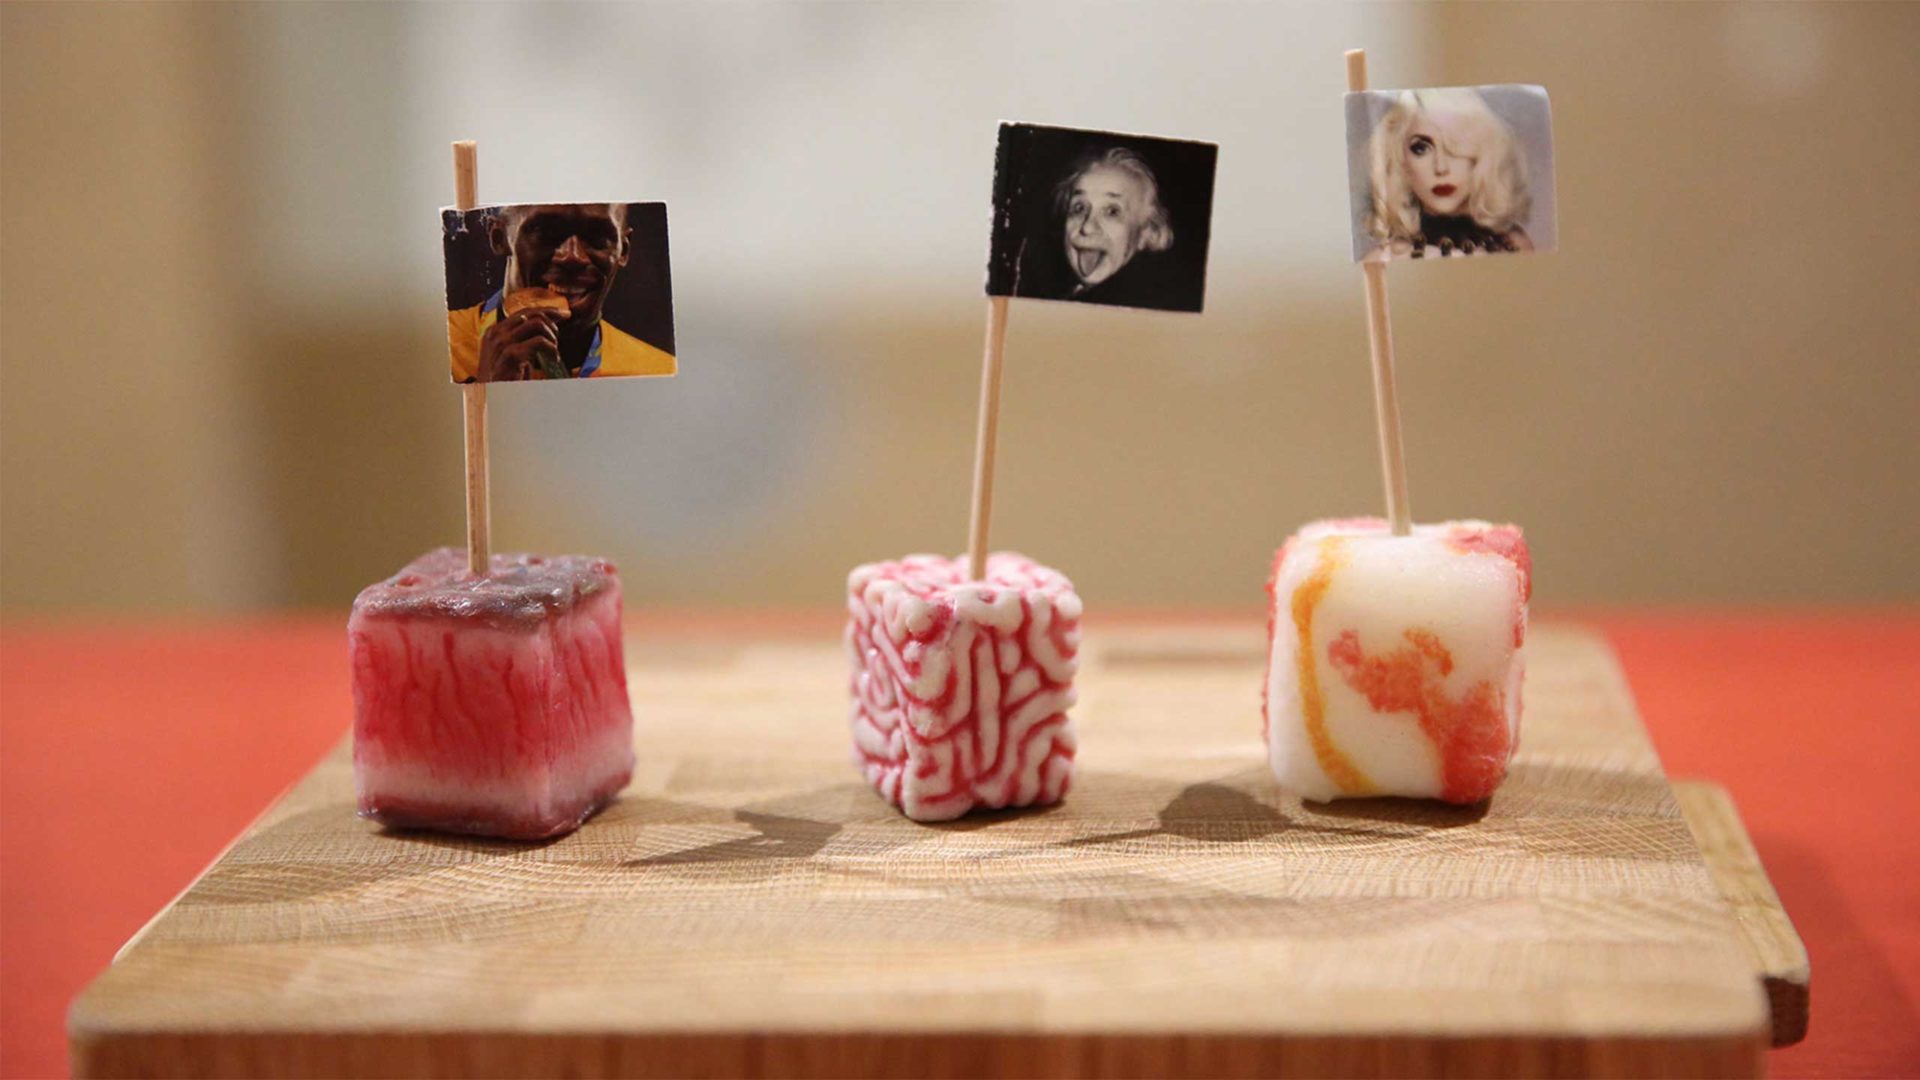 Meat of the future - 3 fictitious meat cubes from VIP genes